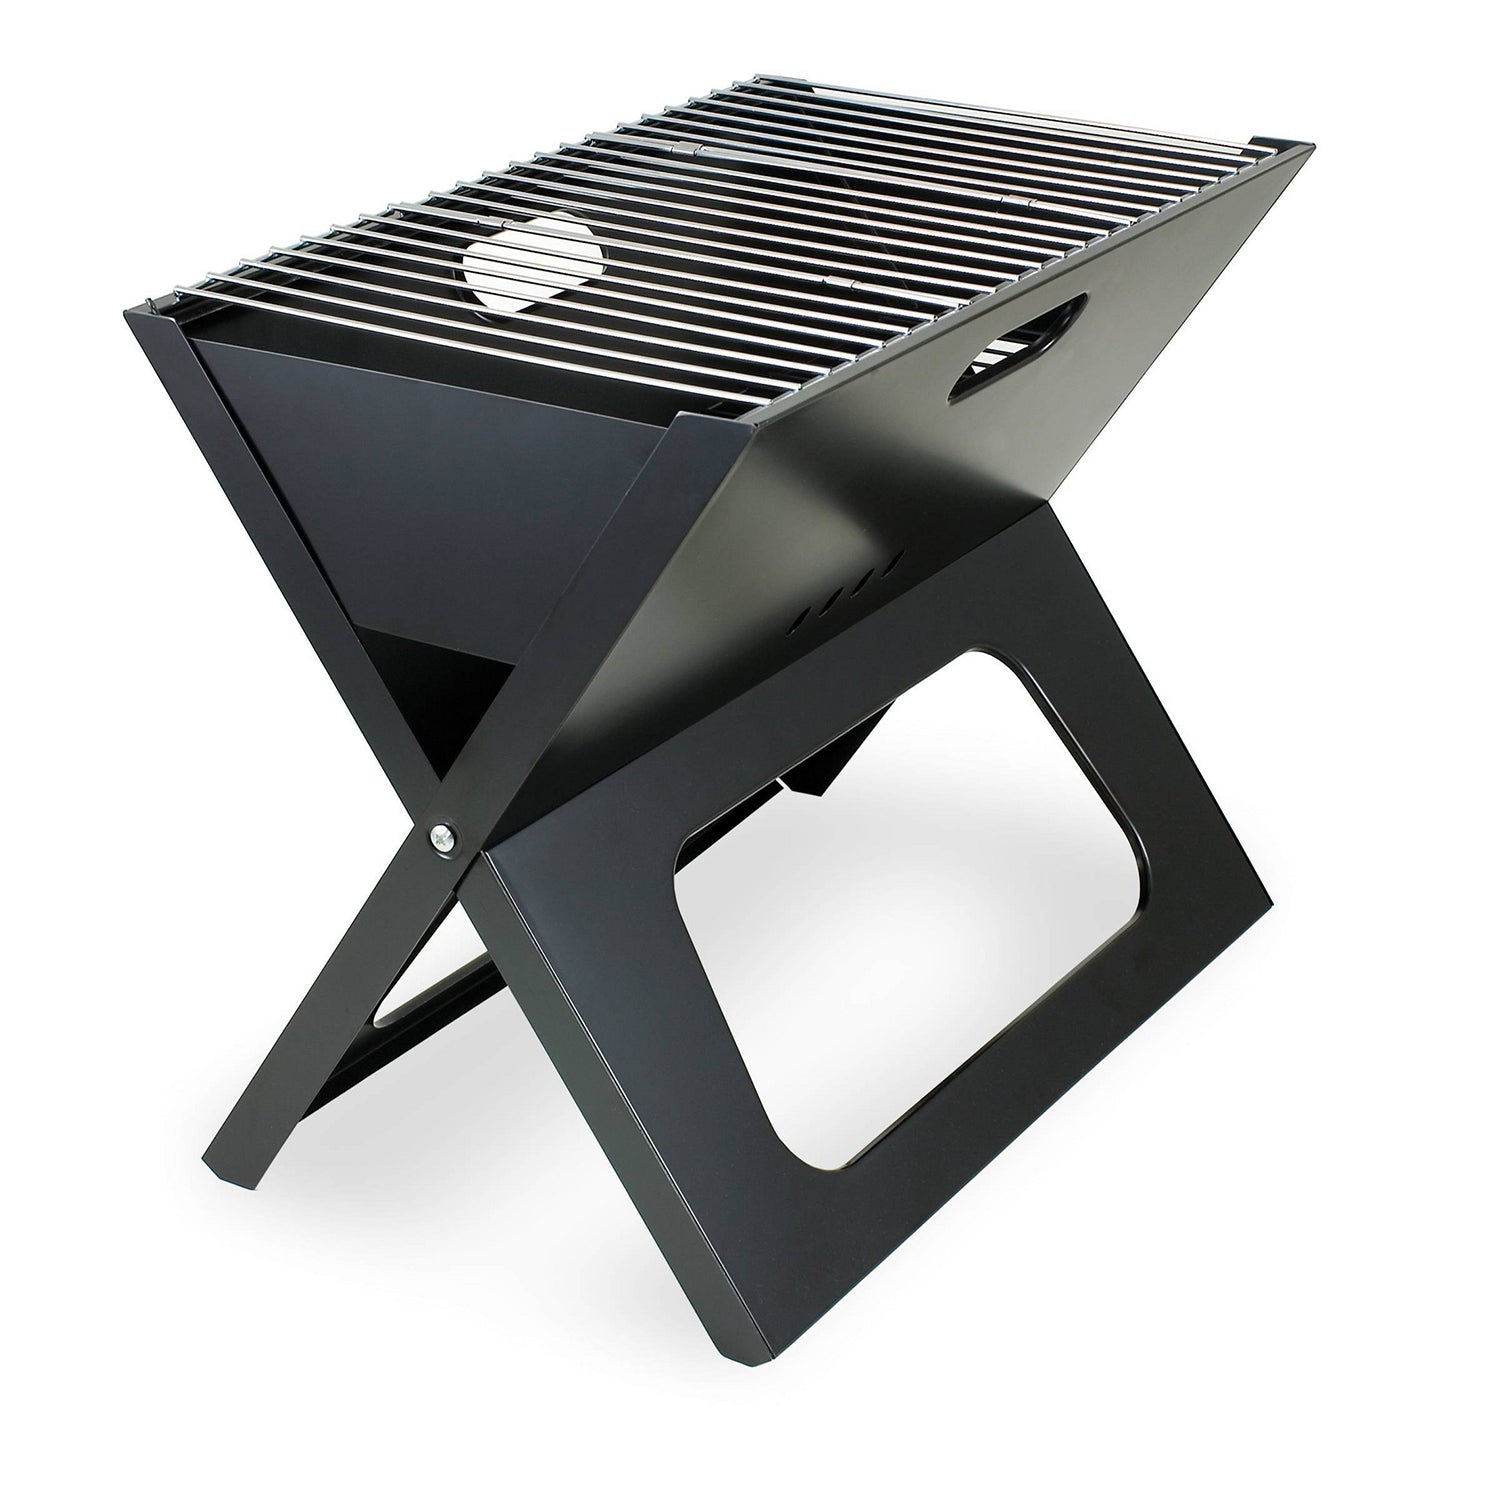 SUGIFT Portable Charcoal Grill in Black